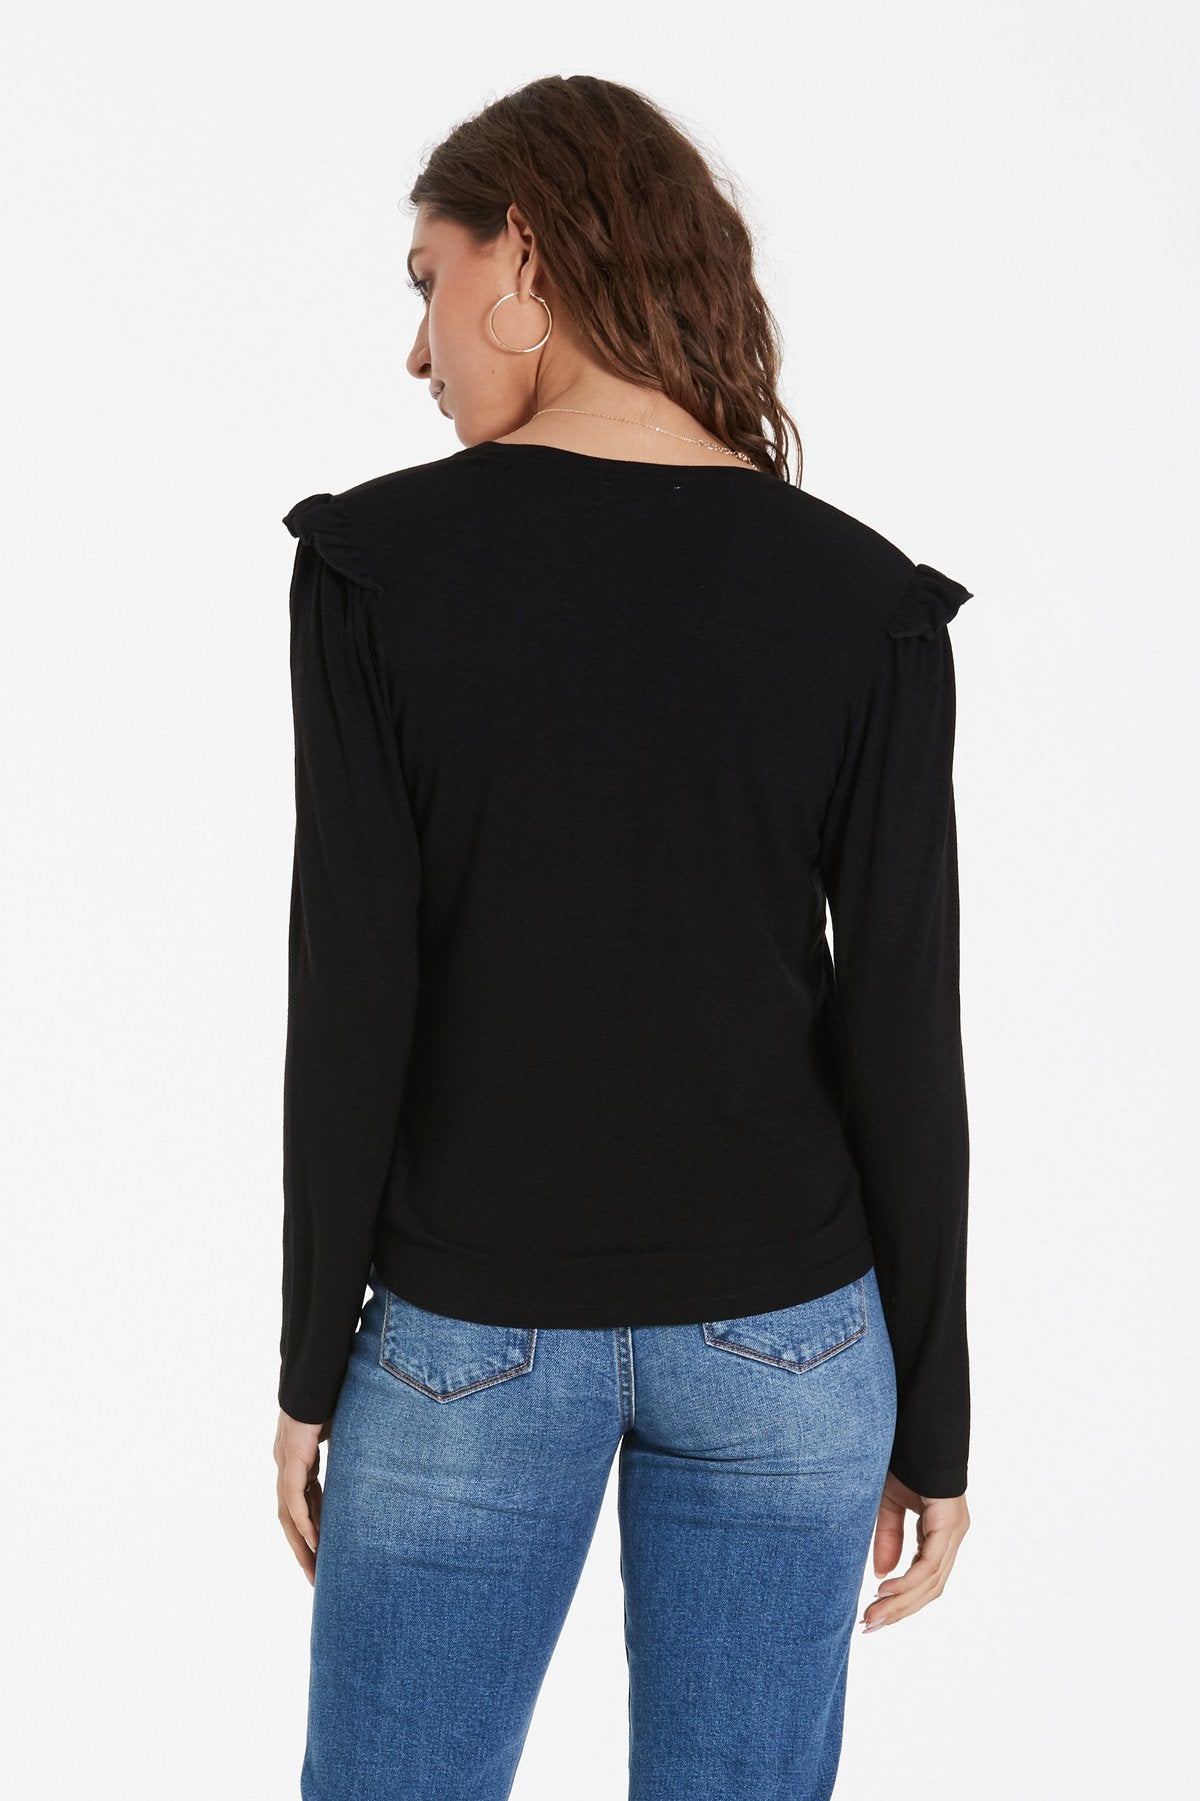 CRYSTAL LONG SLEEVE BASIC WITH RUFFLE SHOULDER DETAIL